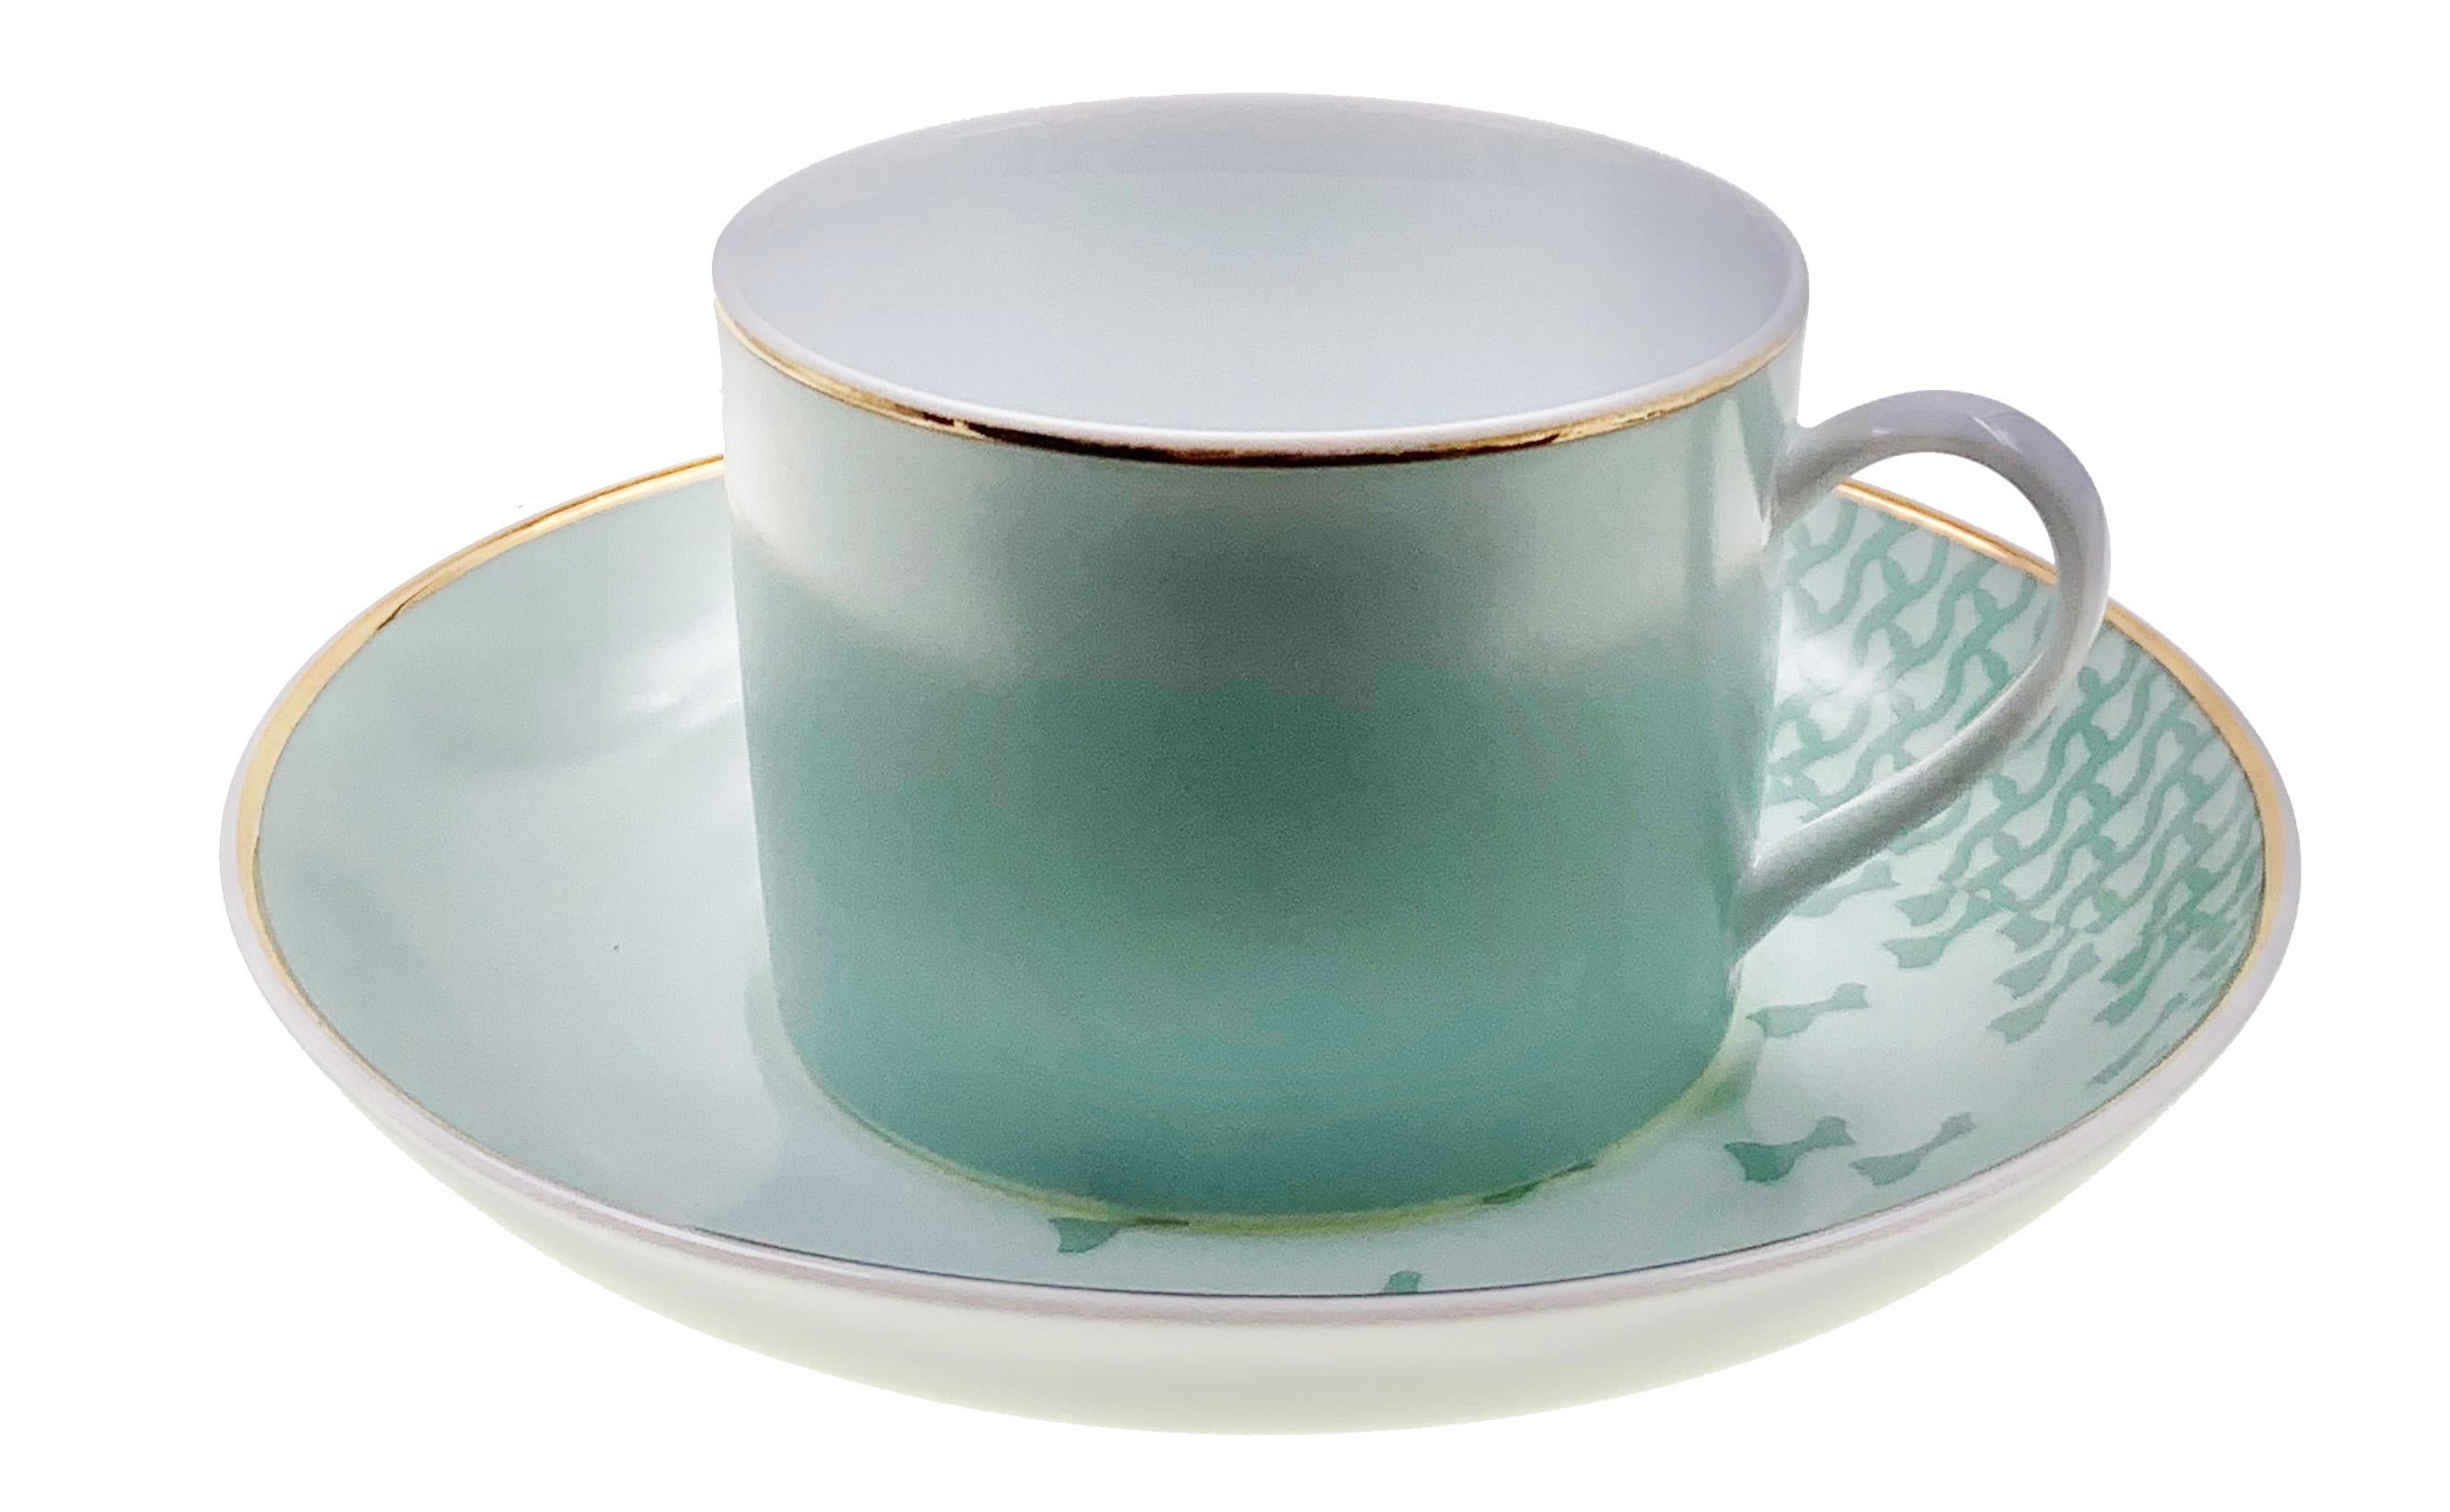 Larger quantities available upon request, with 8 weeks production time.

Description: Set of 2 western tea cup with saucer (2 pieces)
Color: Sage green
Size: 7.5Ø x 5.5H cm, 170 ml
Material: Porcelain and gold
Collection: Mid Century Rhythm